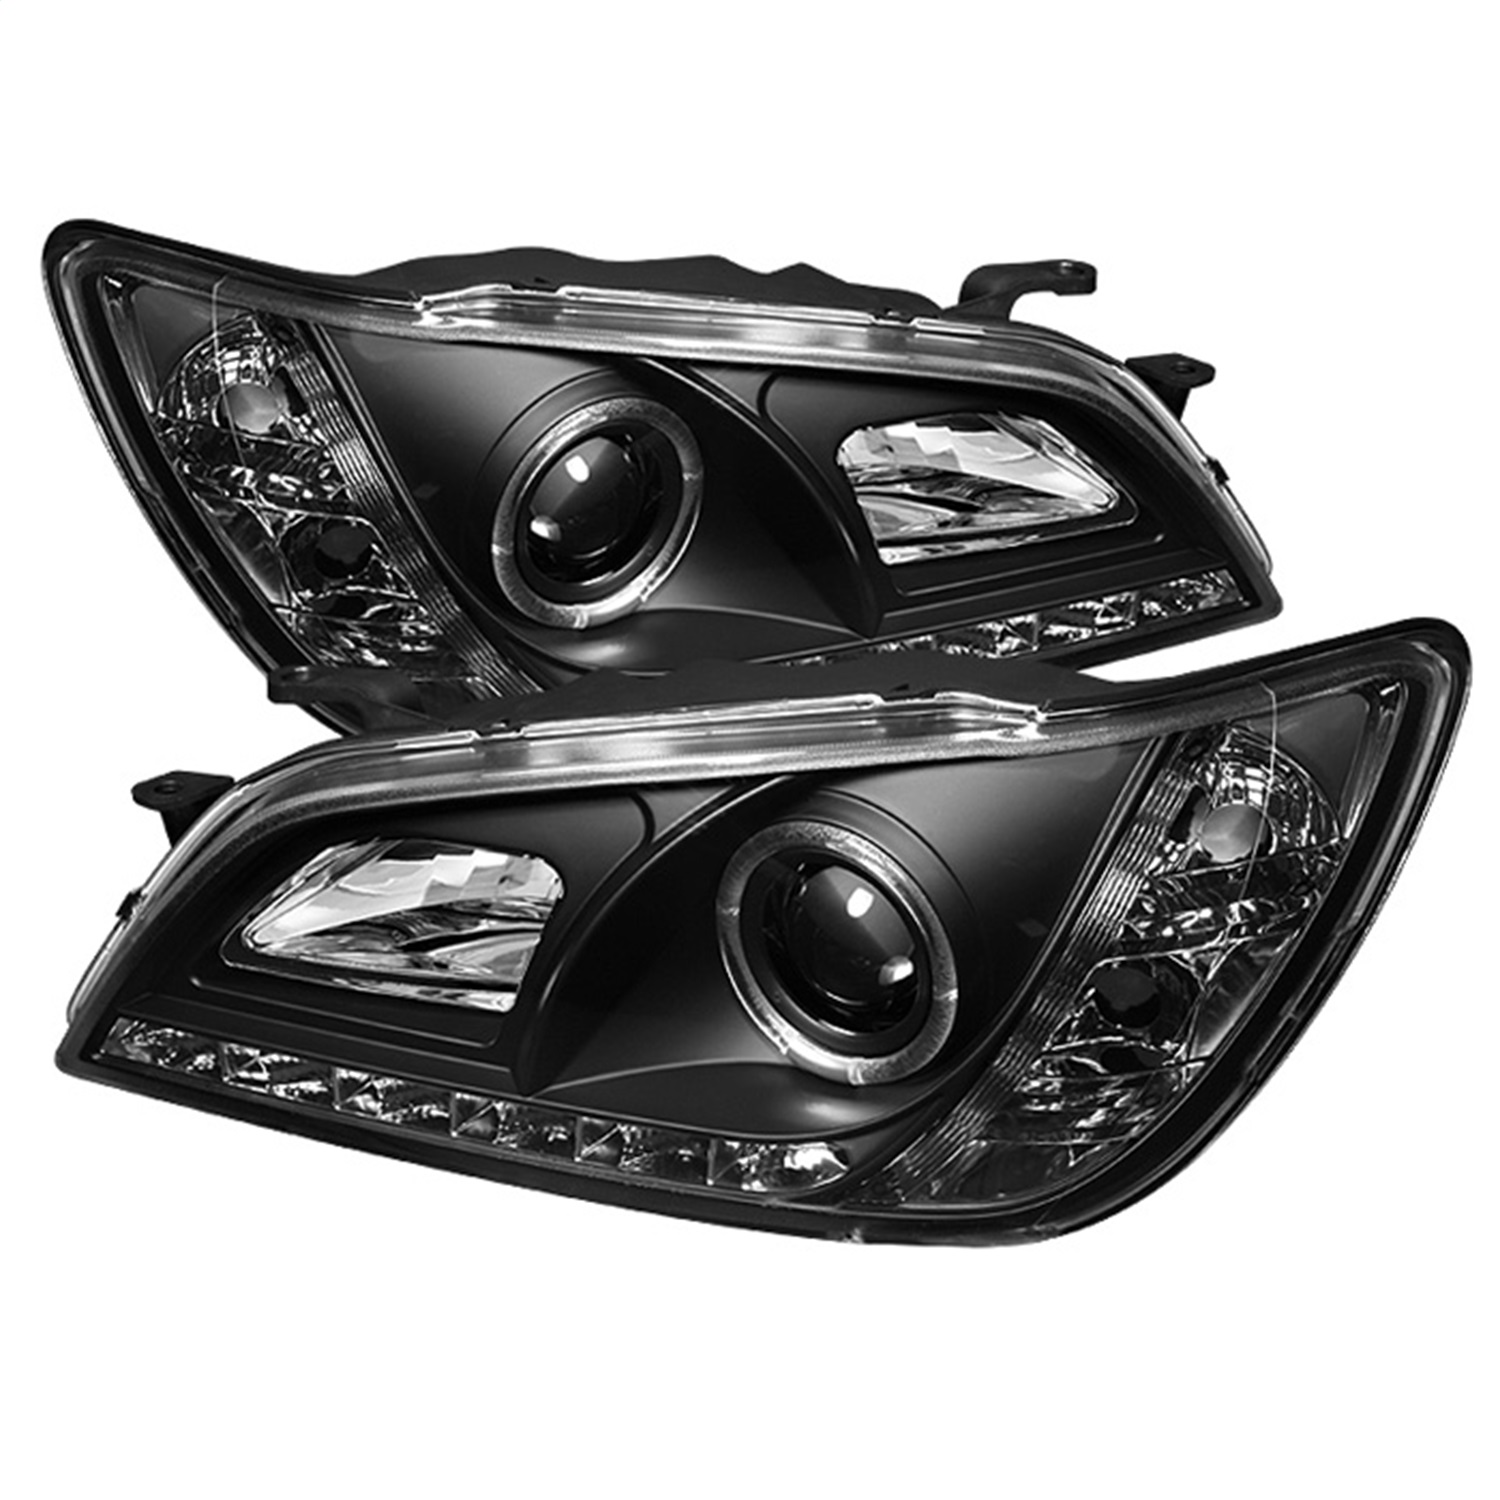 Spyder Auto 5029898 DRL LED Projector Headlights Fits 01-05 IS300